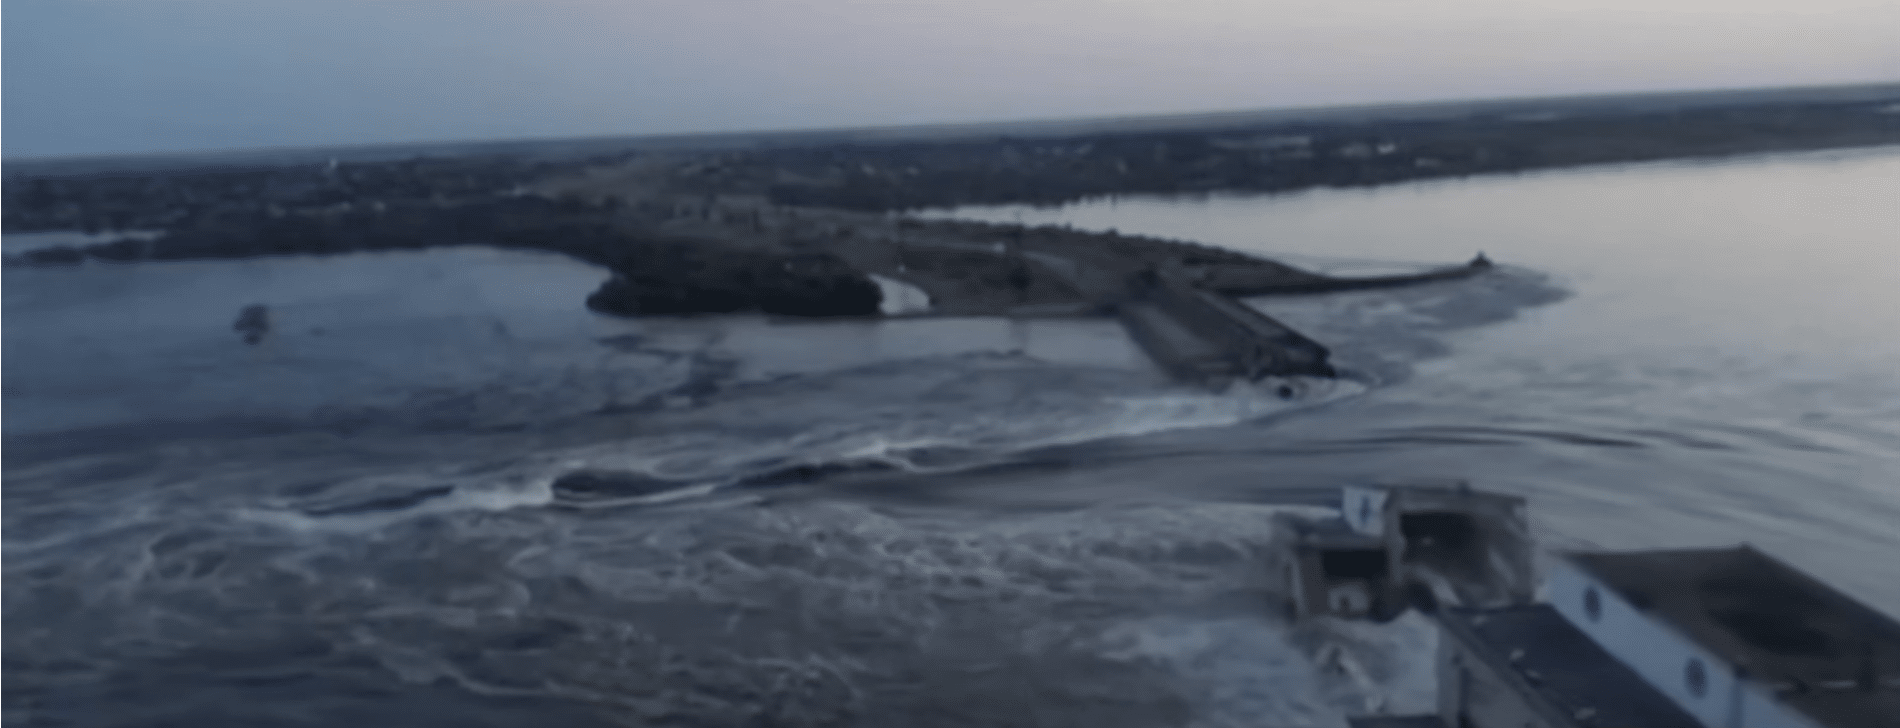 (WATCH) Ukraine accuses Russia of destroying major dam; Warns of ecological disaster, Animals drown, Threatens nuclear plant